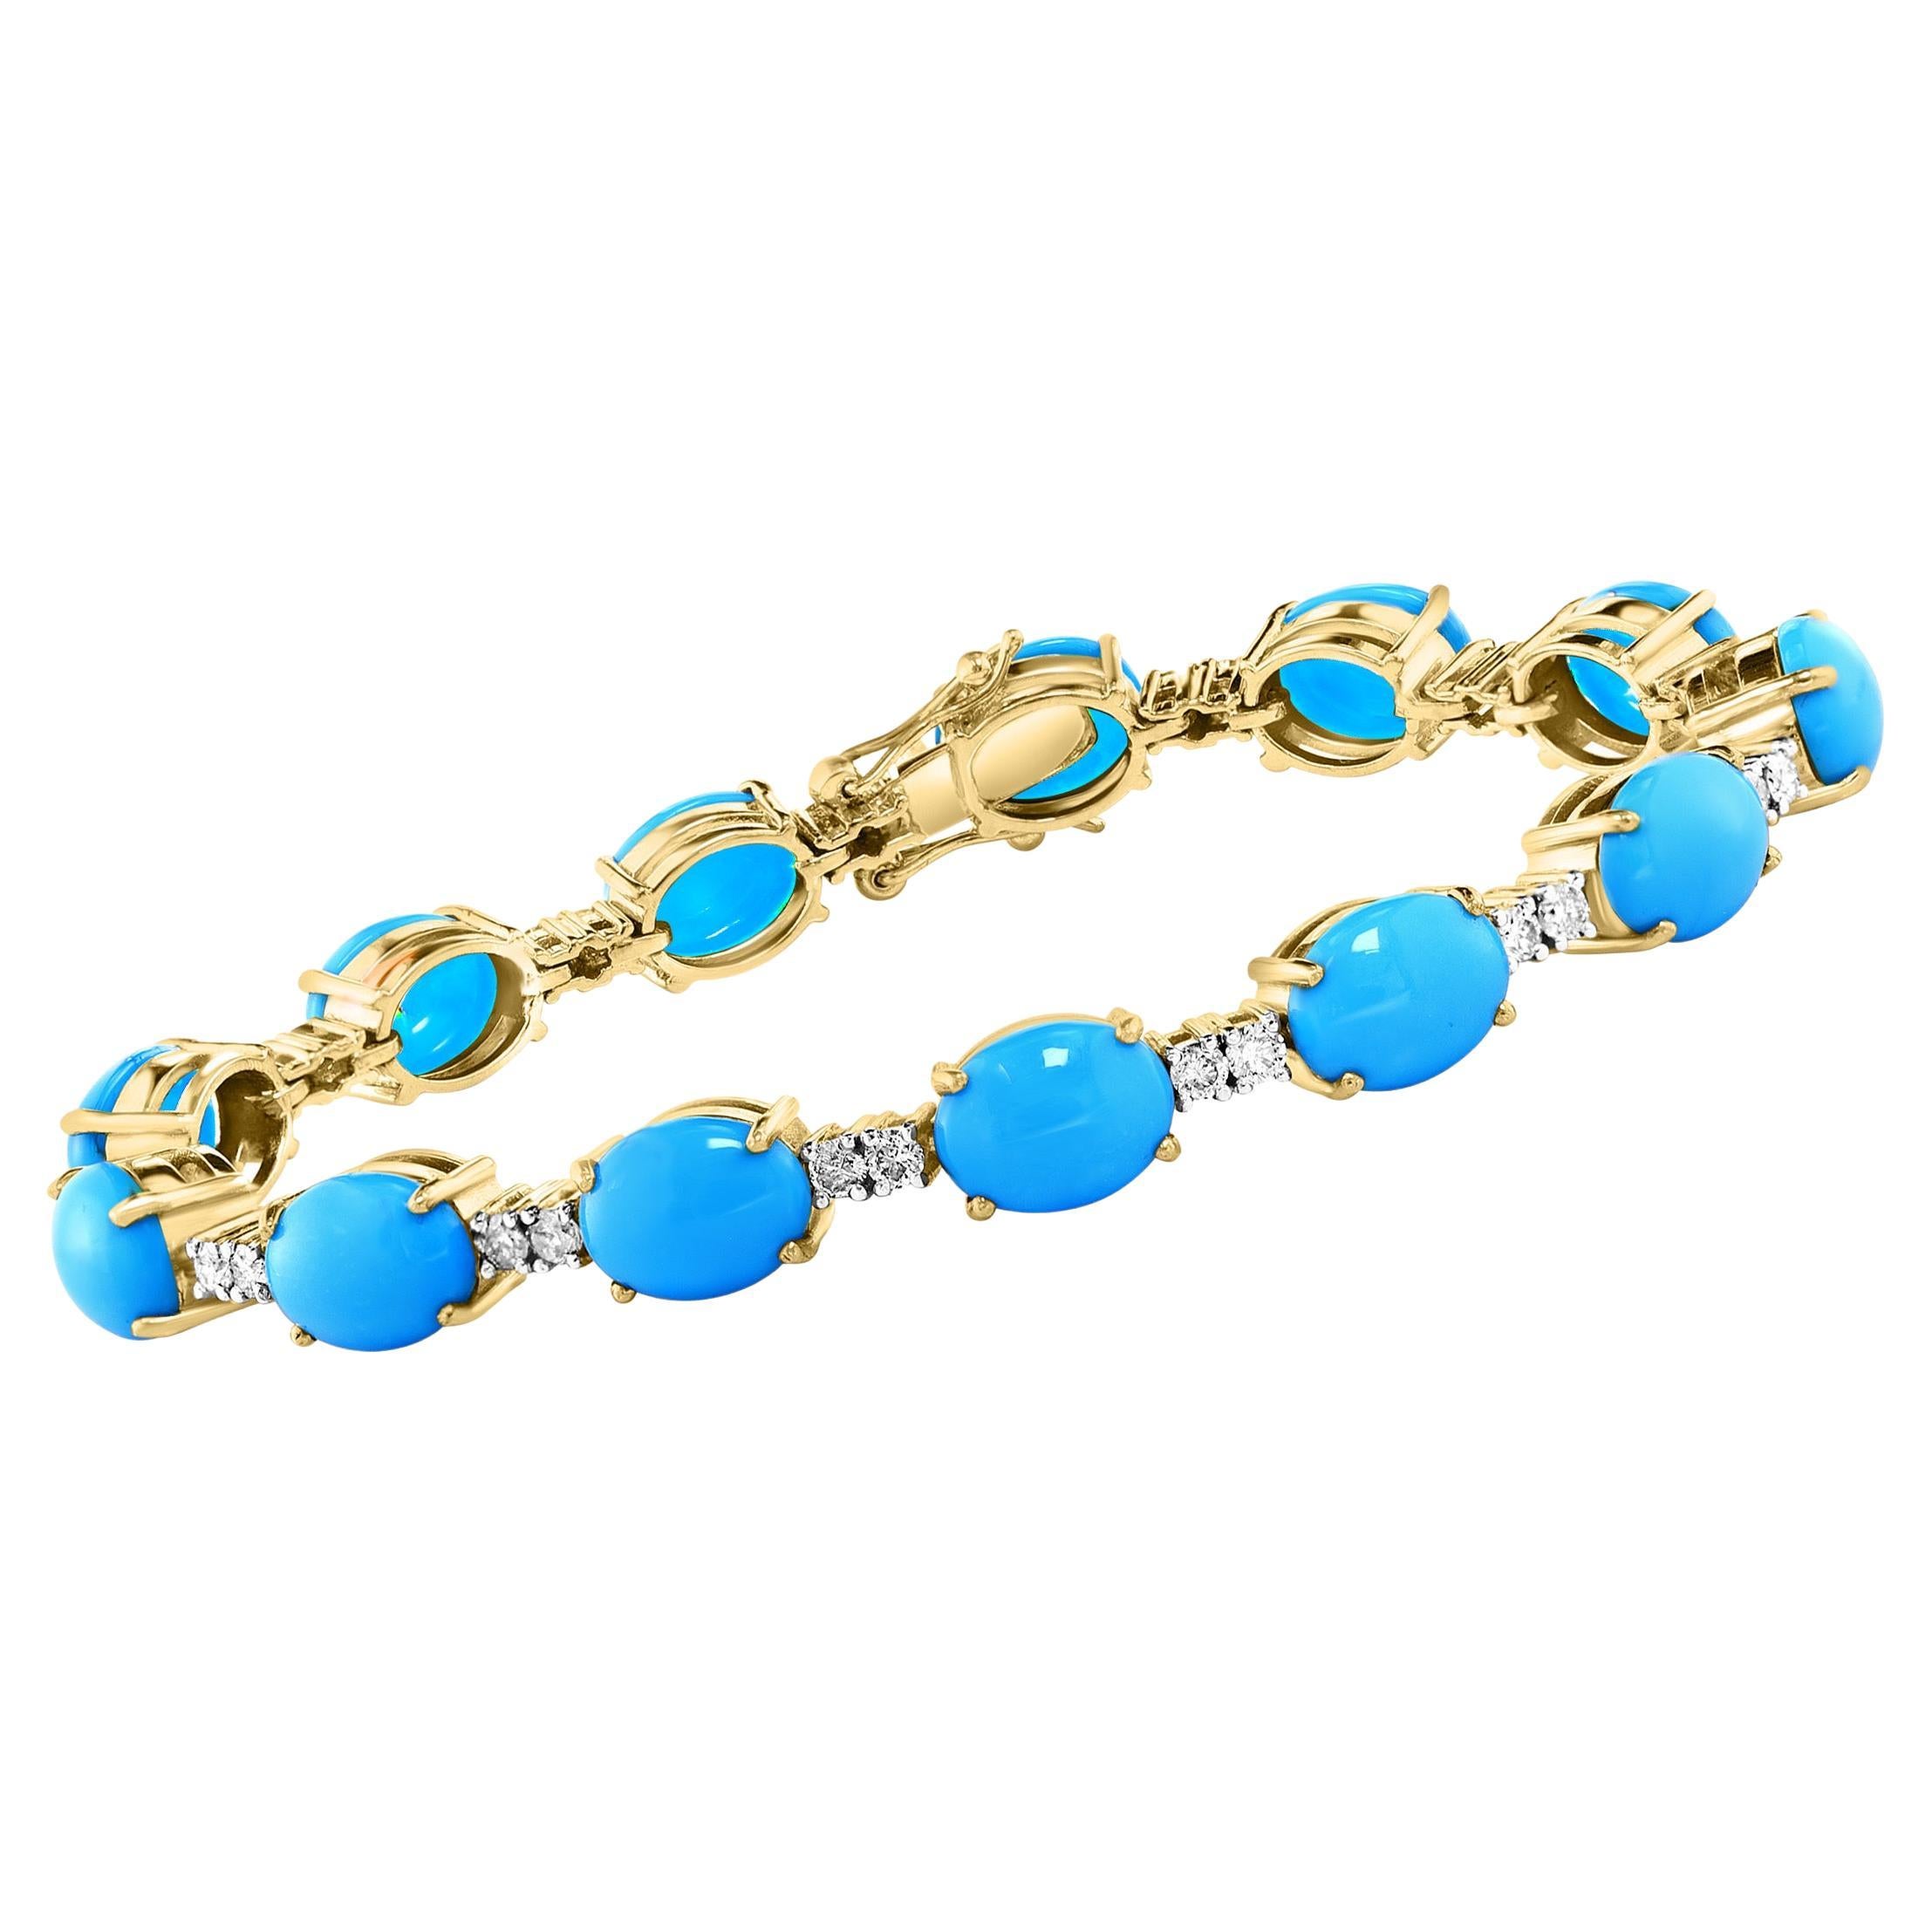 13Ct Natural Sleeping Beauty Turquoise & Diamond Tennis Bracelet 14k Yellow Gold For Sale